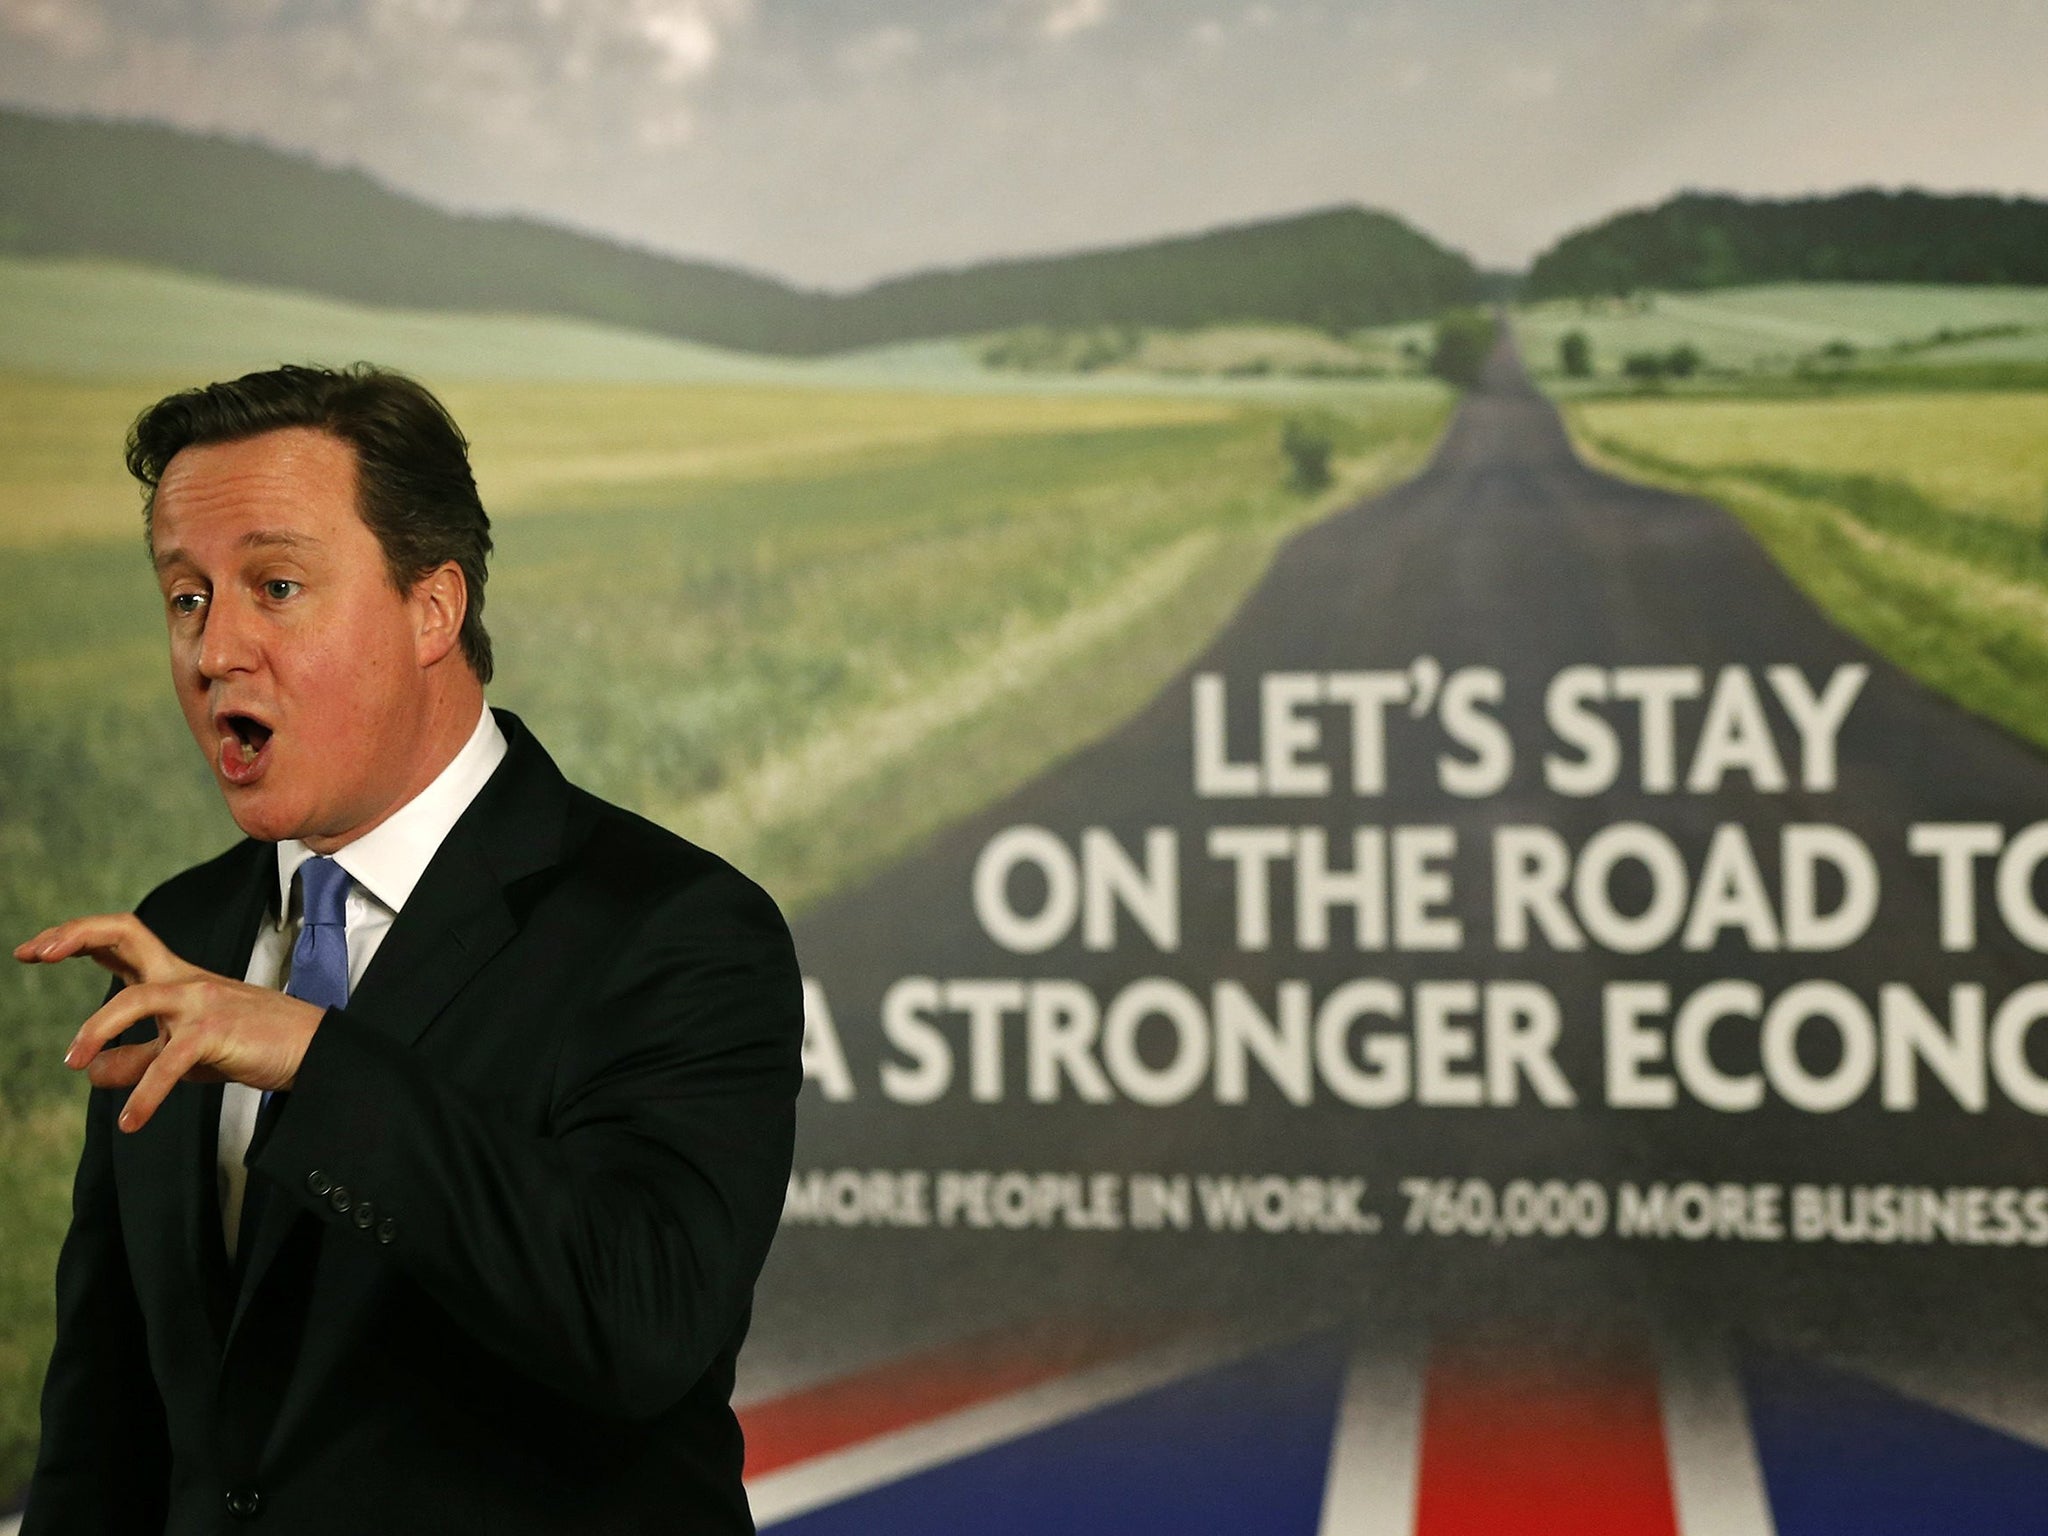 David Cameron in front of the new Conservative Party election poster yesterday